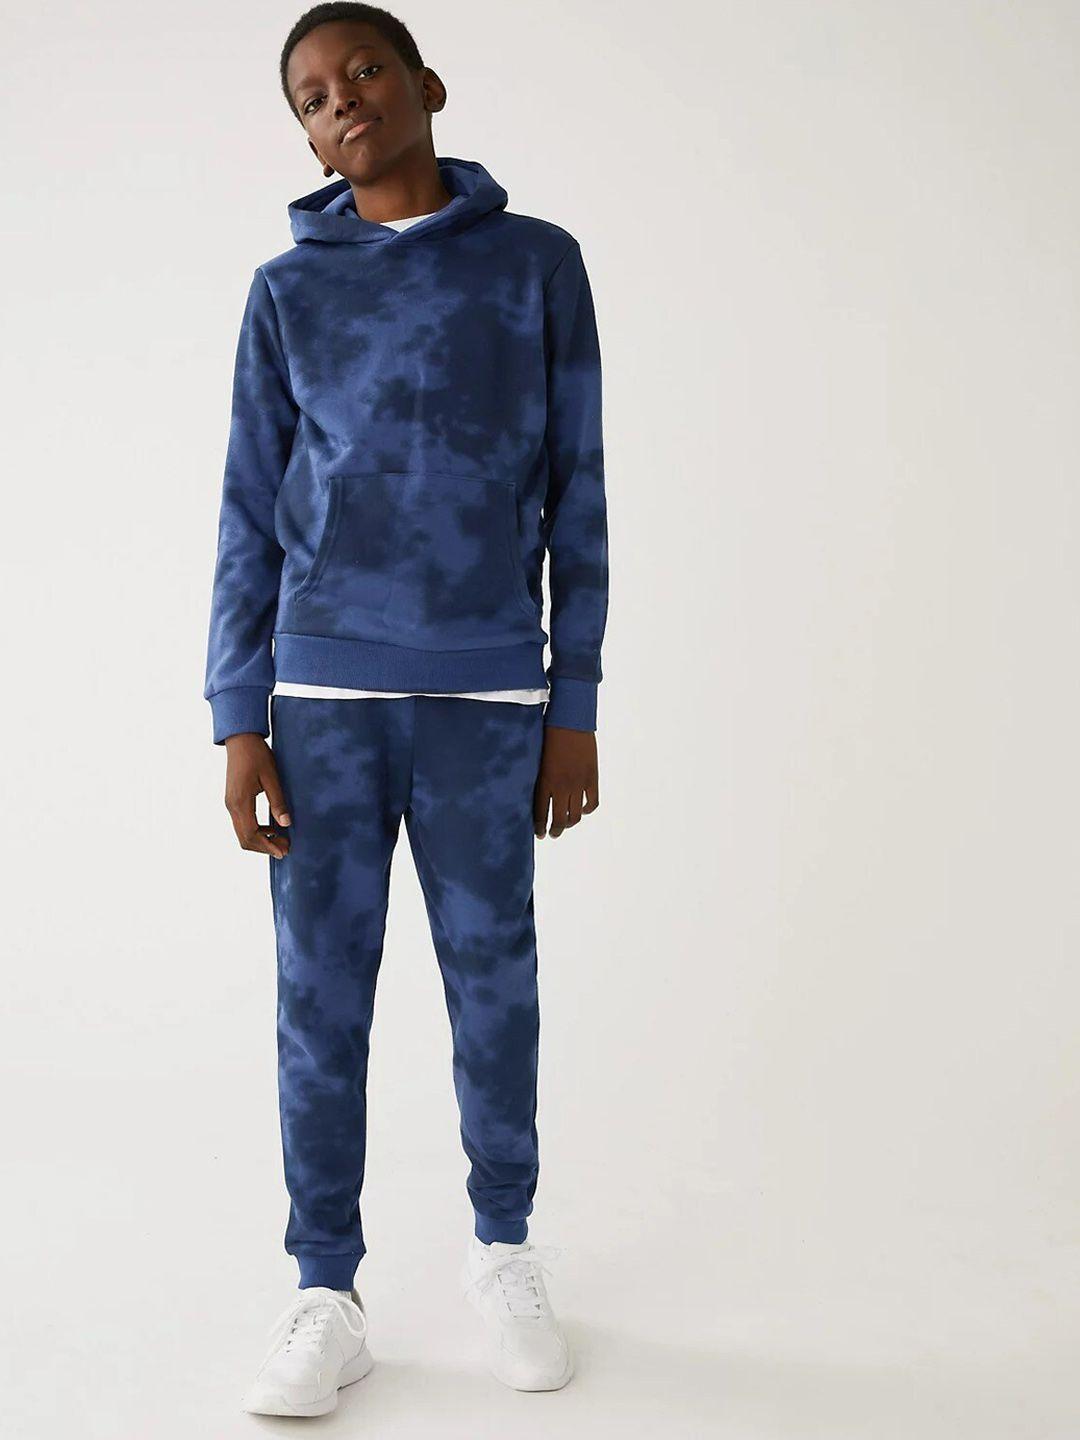 marks & spencer boys navy blue printed high-rise joggers